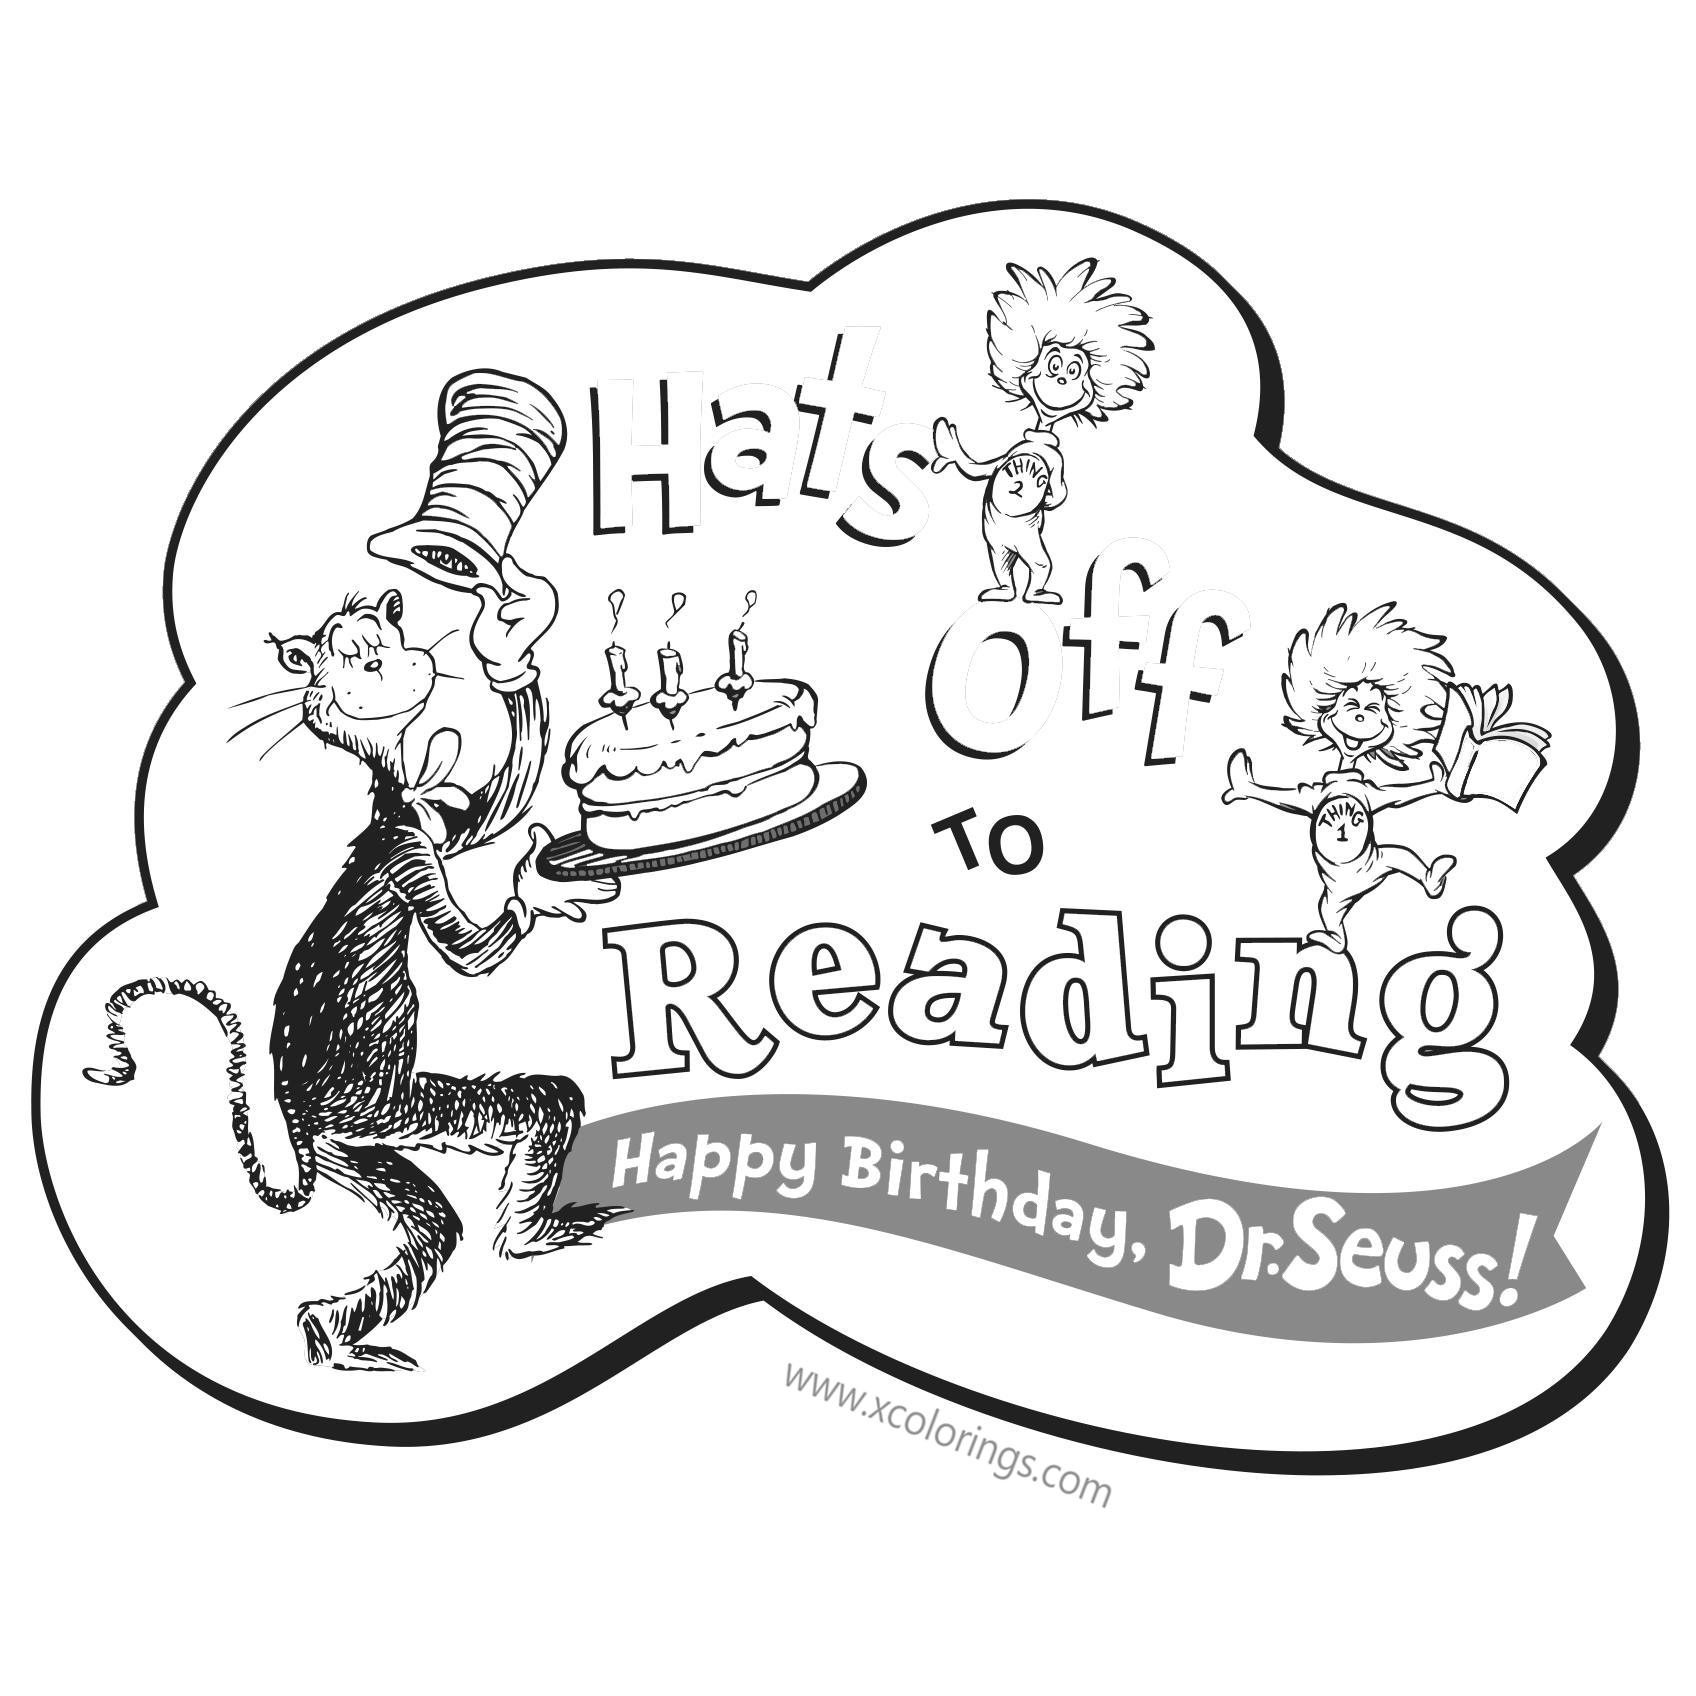 Free Happy Birthday Dr Seuss Coloring Pages Hats off to Reading printable